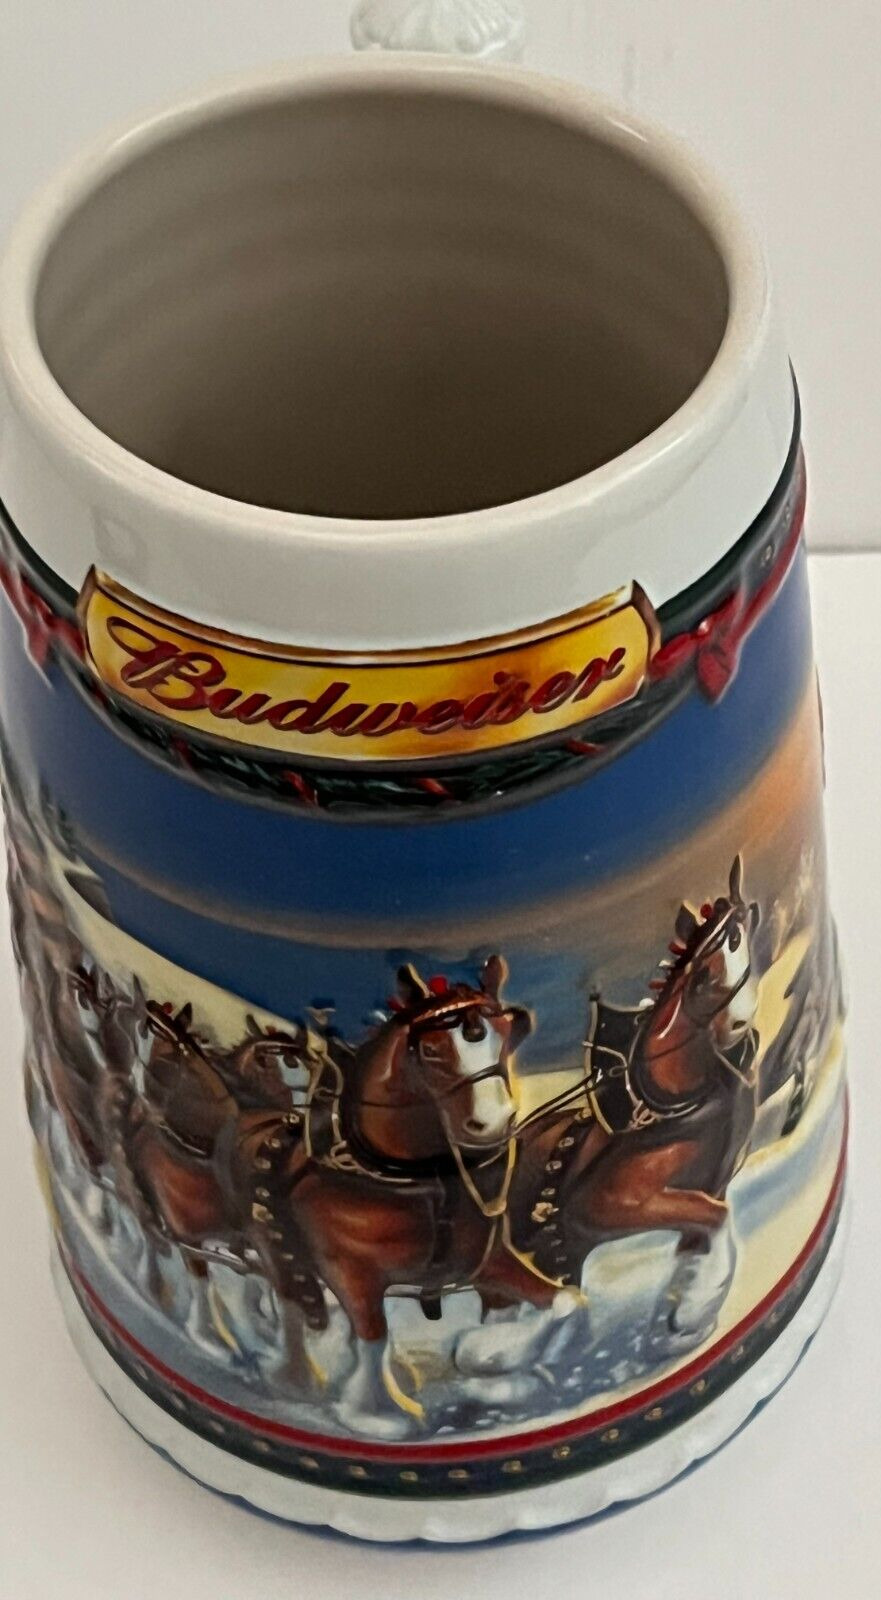 Budweiser Holiday Beer Stein Mug 2002 The Way Home CS529 Clydesdales Lighthouse